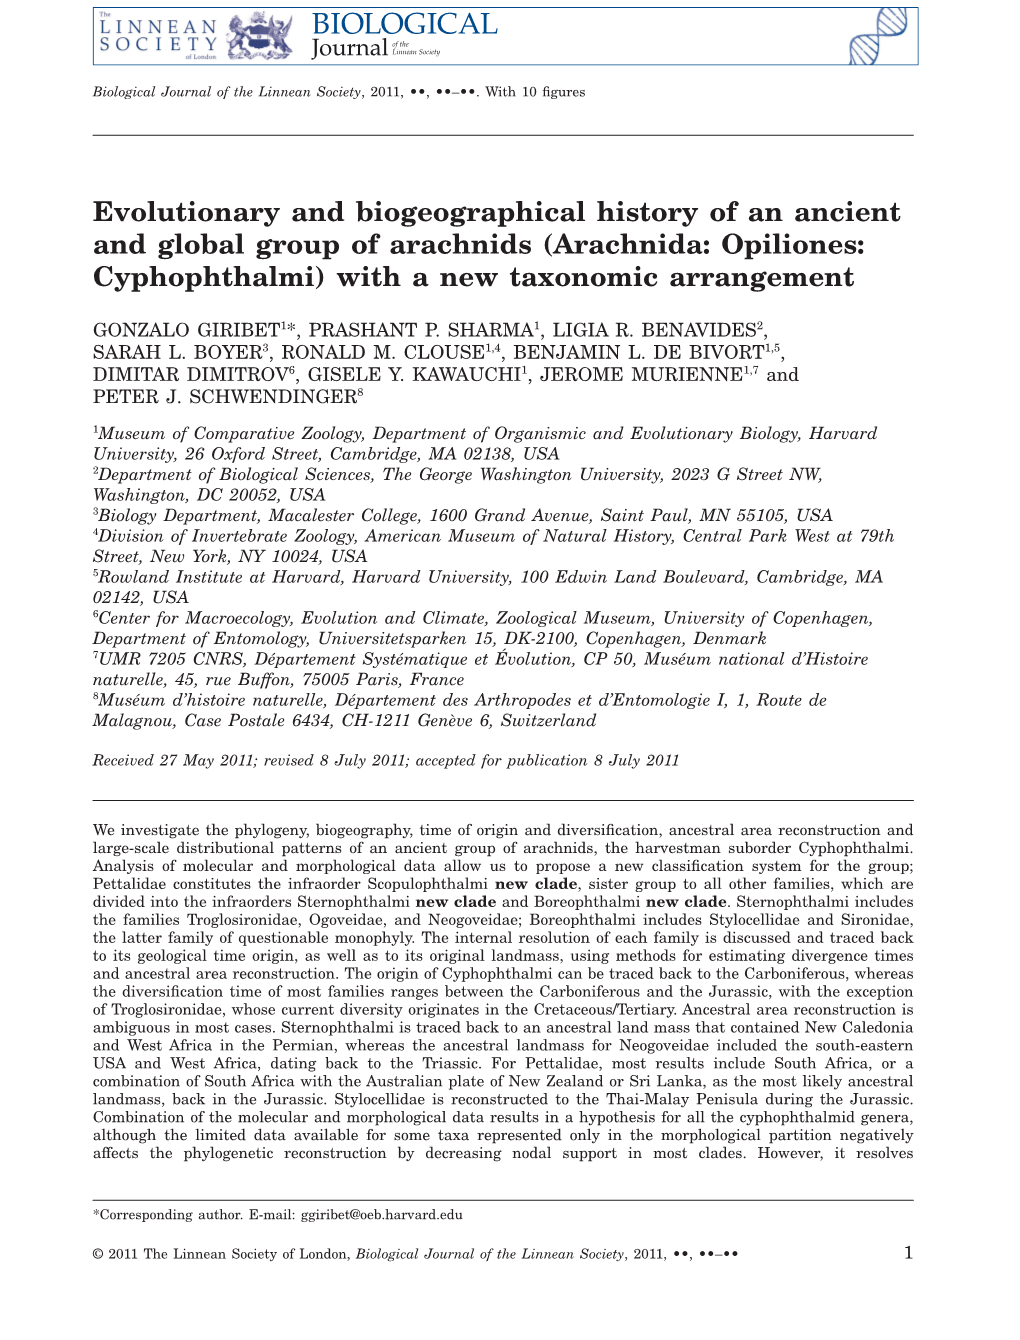 Evolutionary and Biogeographical History of an Ancient and Global Group of Arachnids (Arachnida: Opiliones: Cyphophthalmi) with a New Taxonomic Arrangement